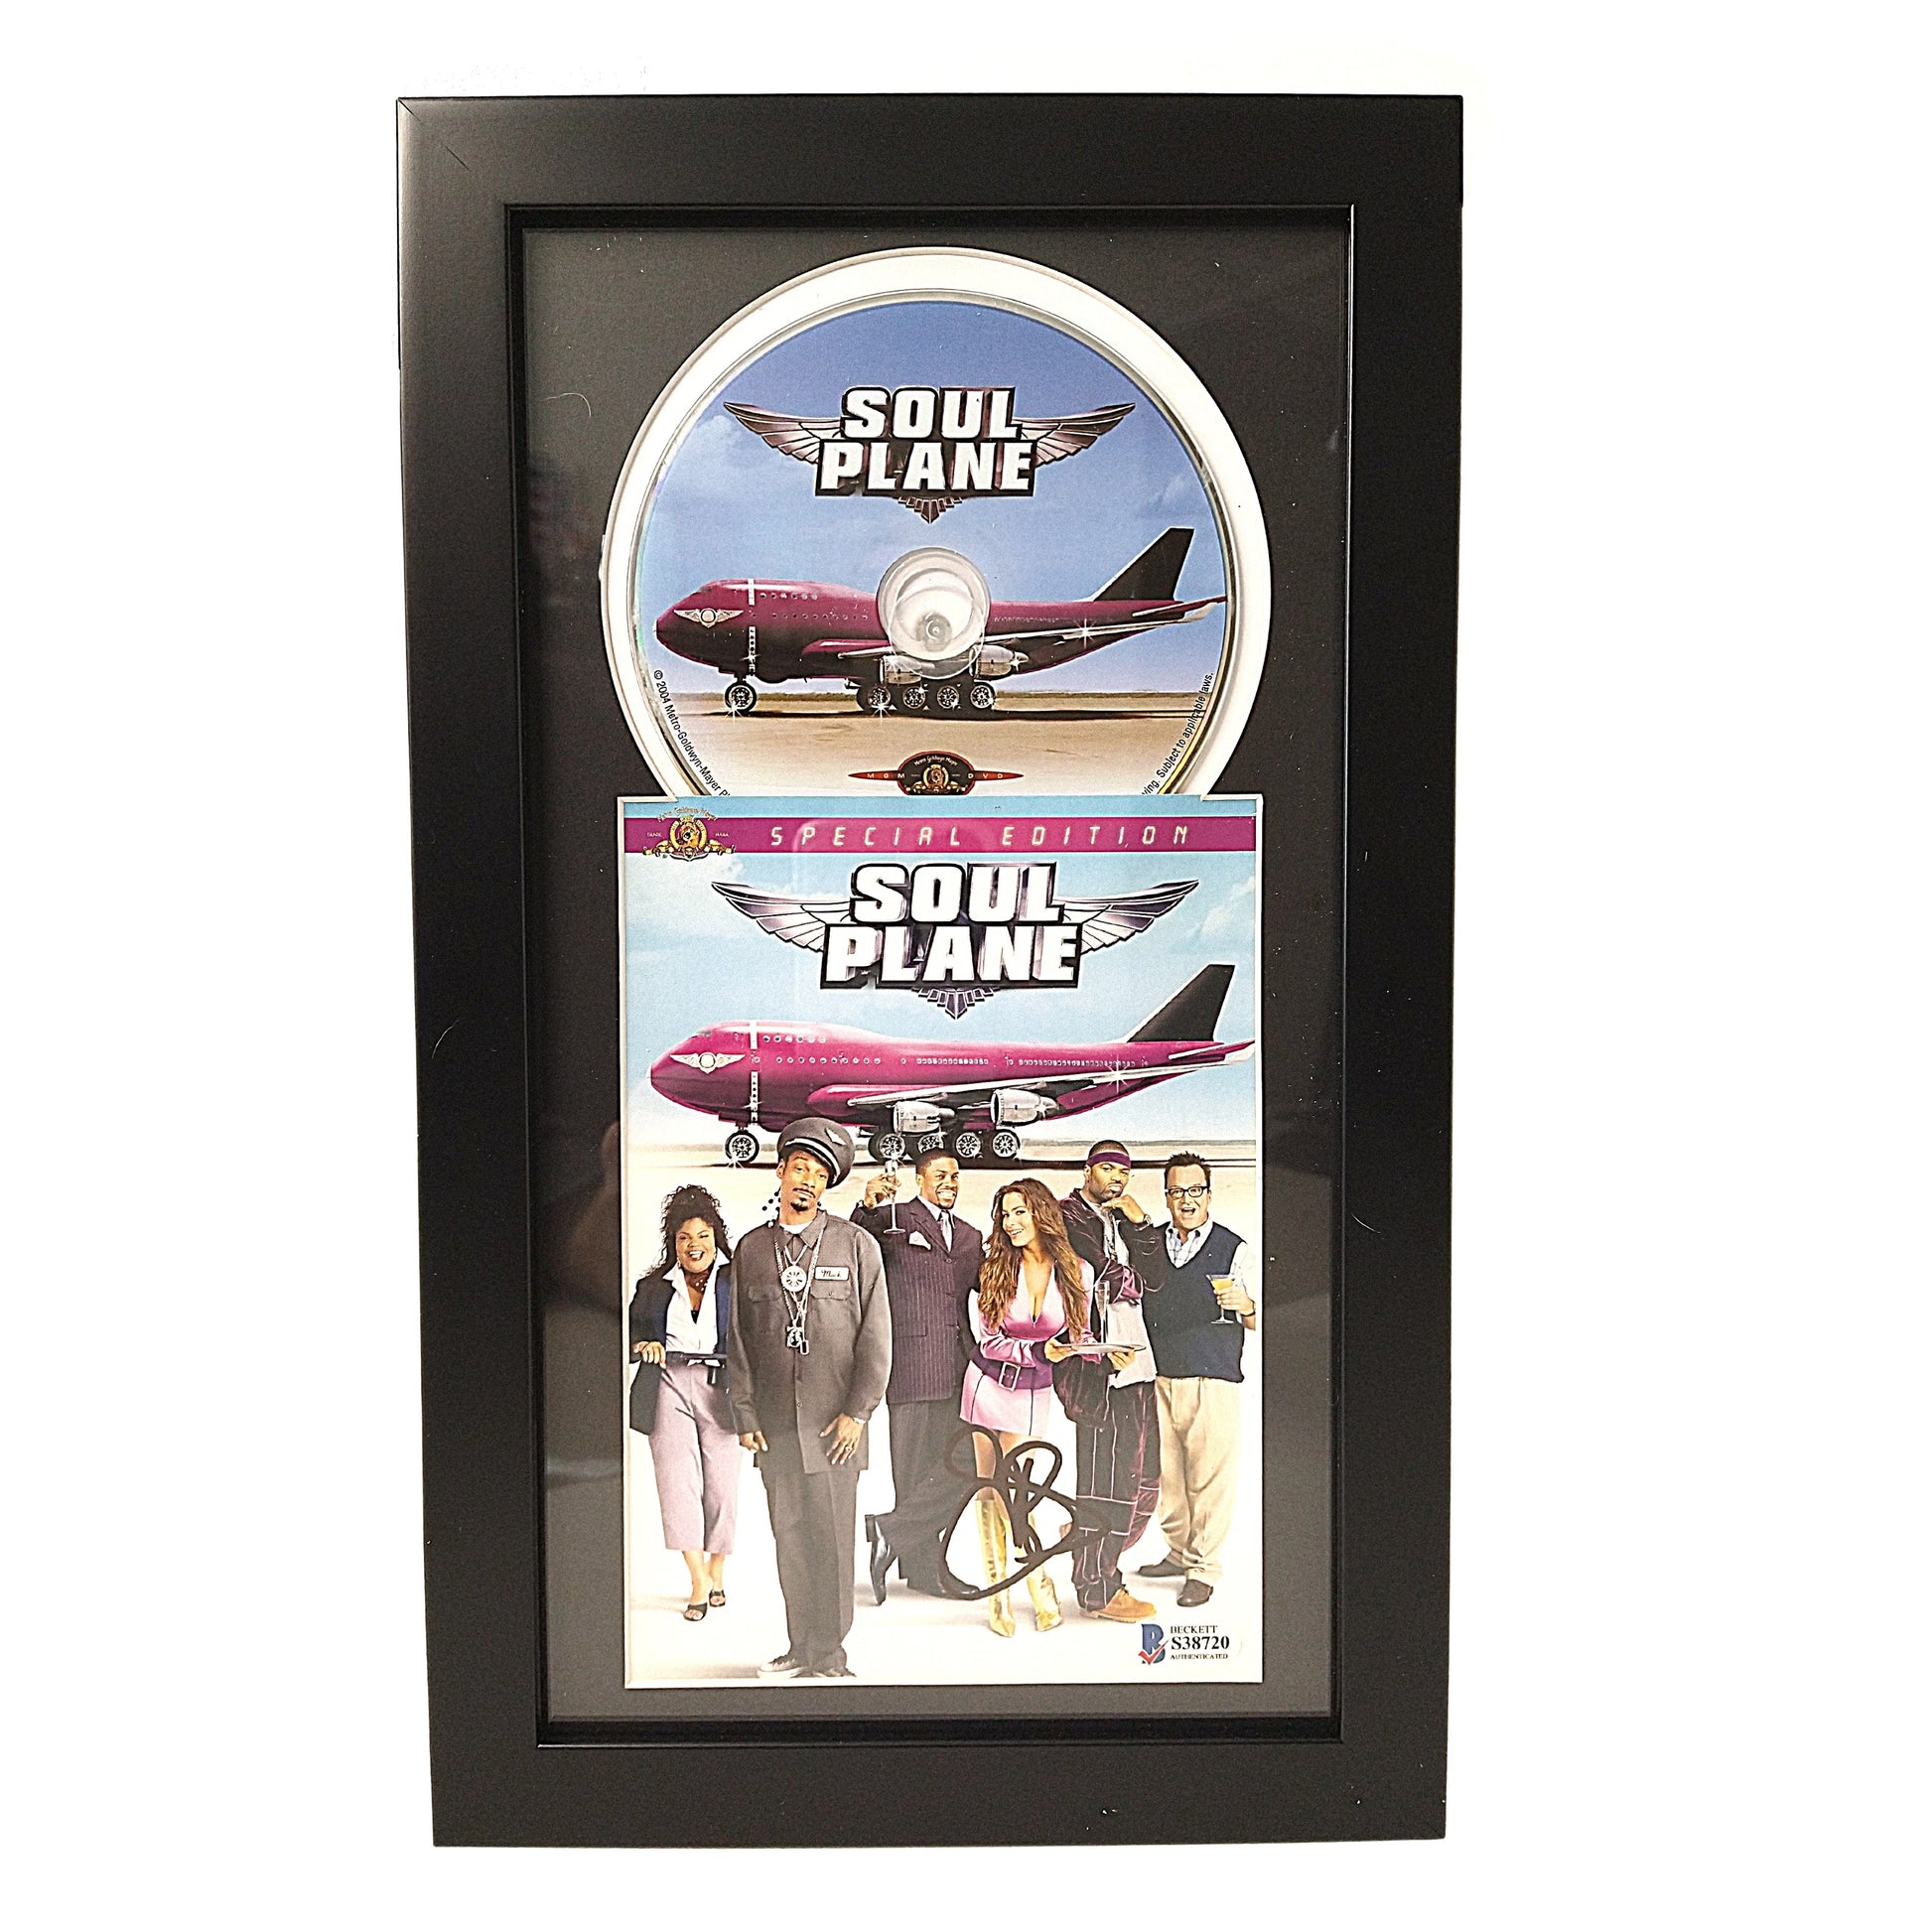 Hollywood- Autographed- Snoop Dogg Signed Soul Plane DVD Cover Framed Matted Beckett BAS Authentication 101